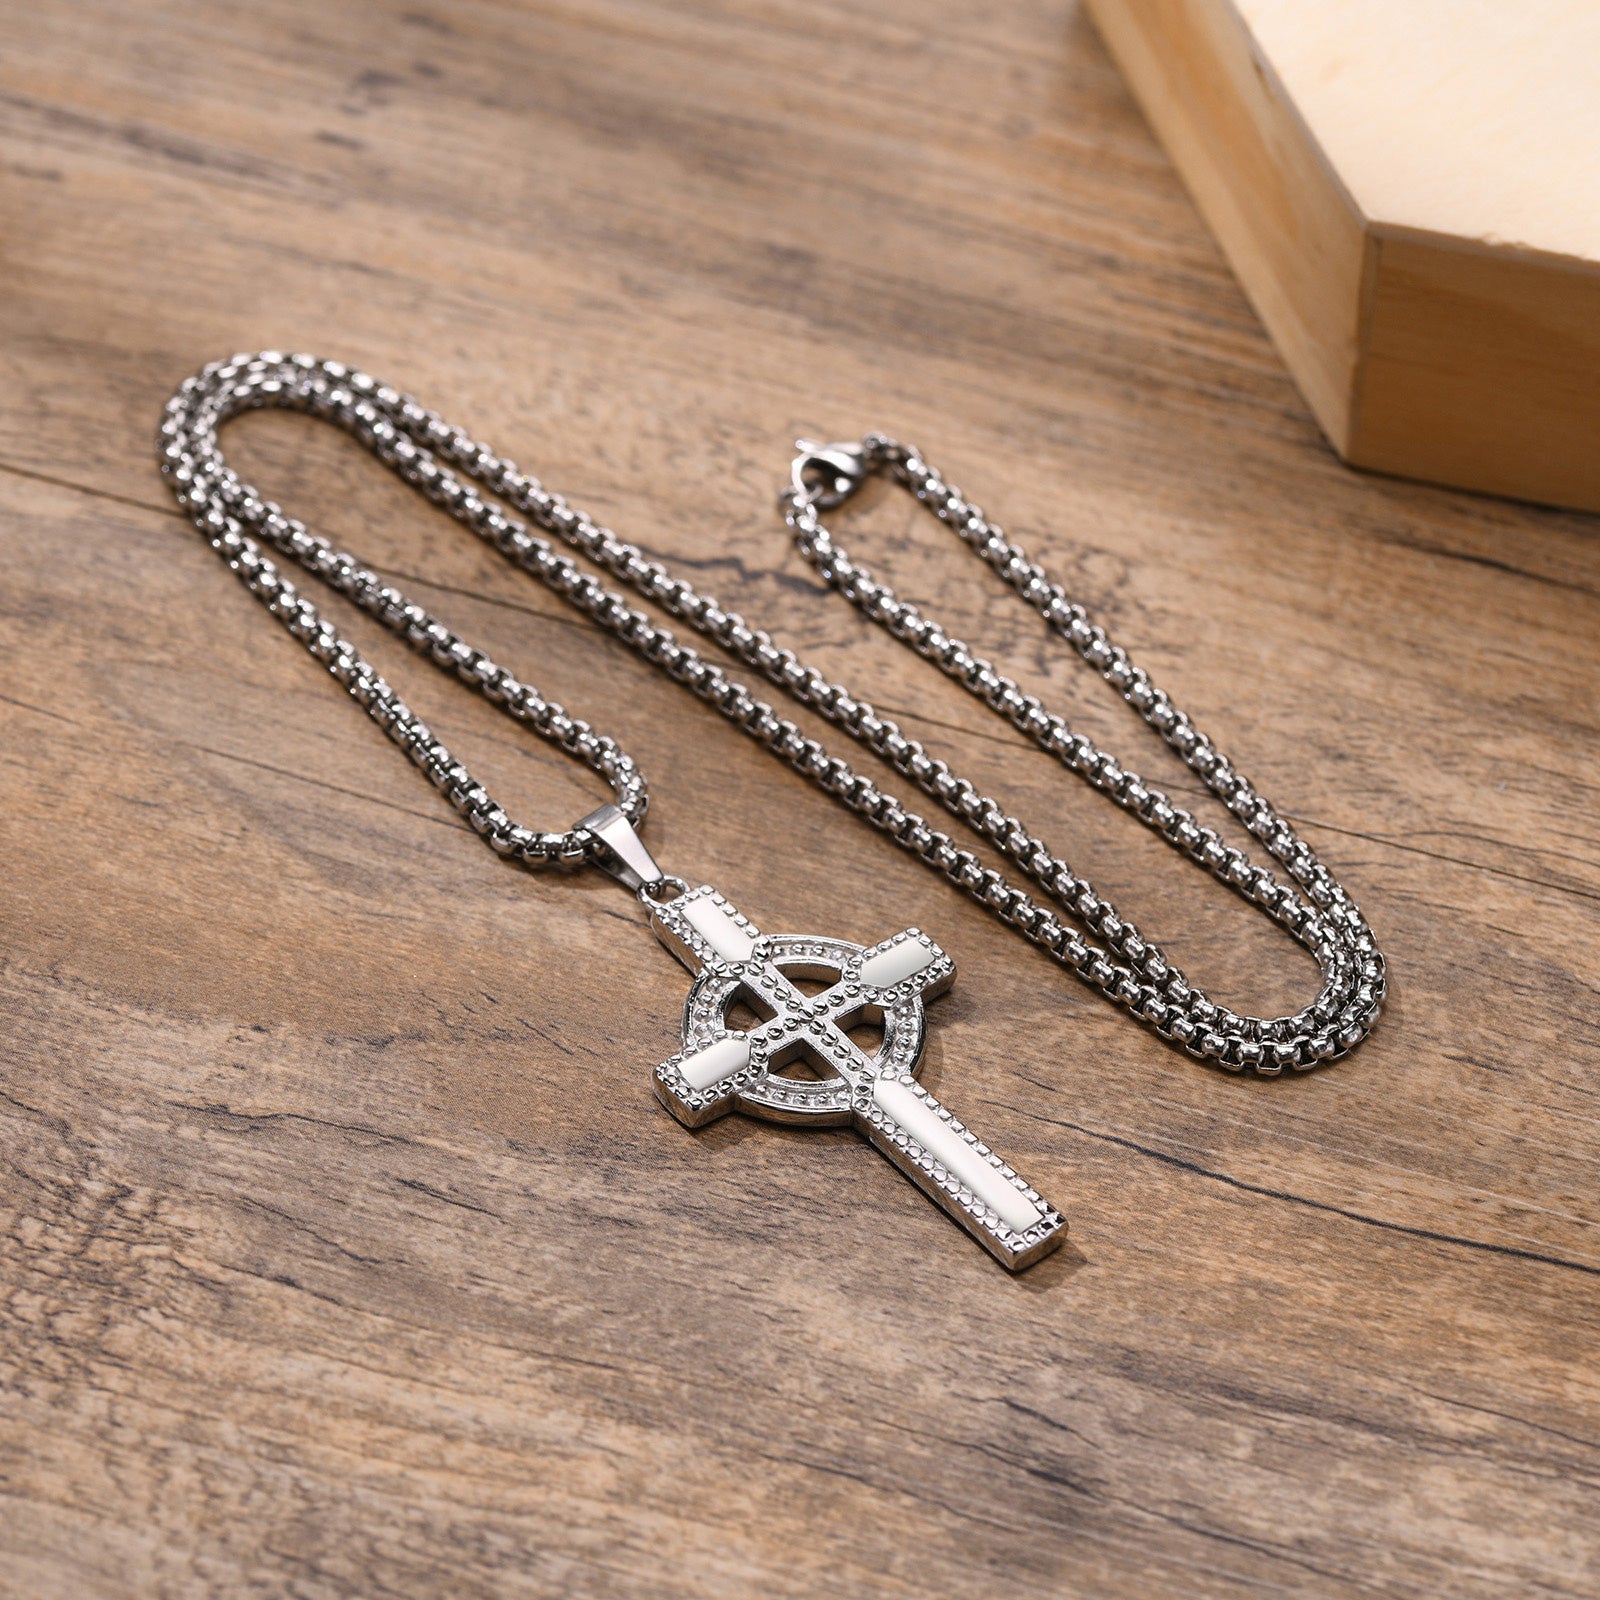 Stainless Steel Celtic Cross Necklace